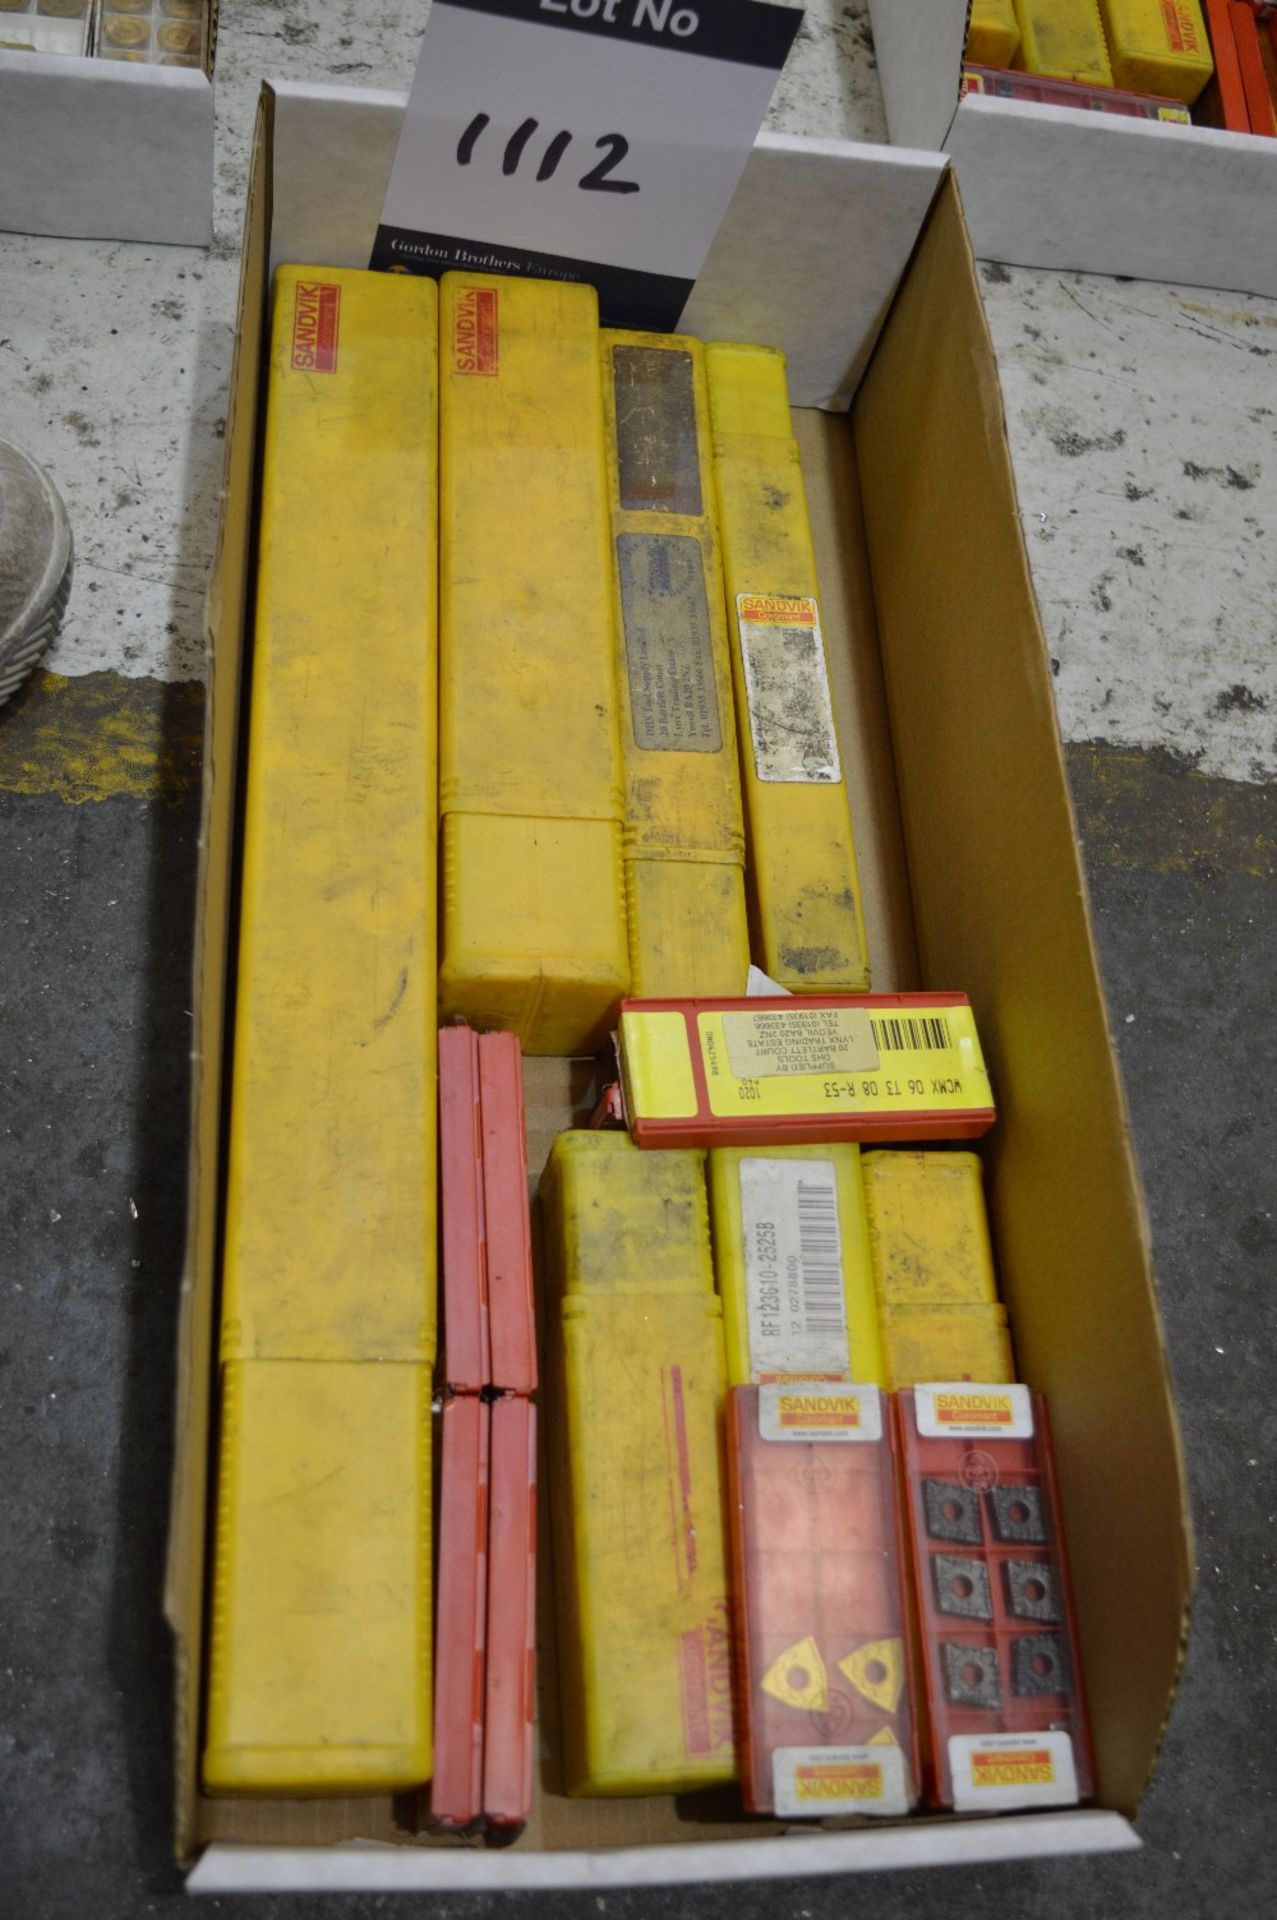 Seven Sandvik Turning Holders and 8 Boxes of Tips,